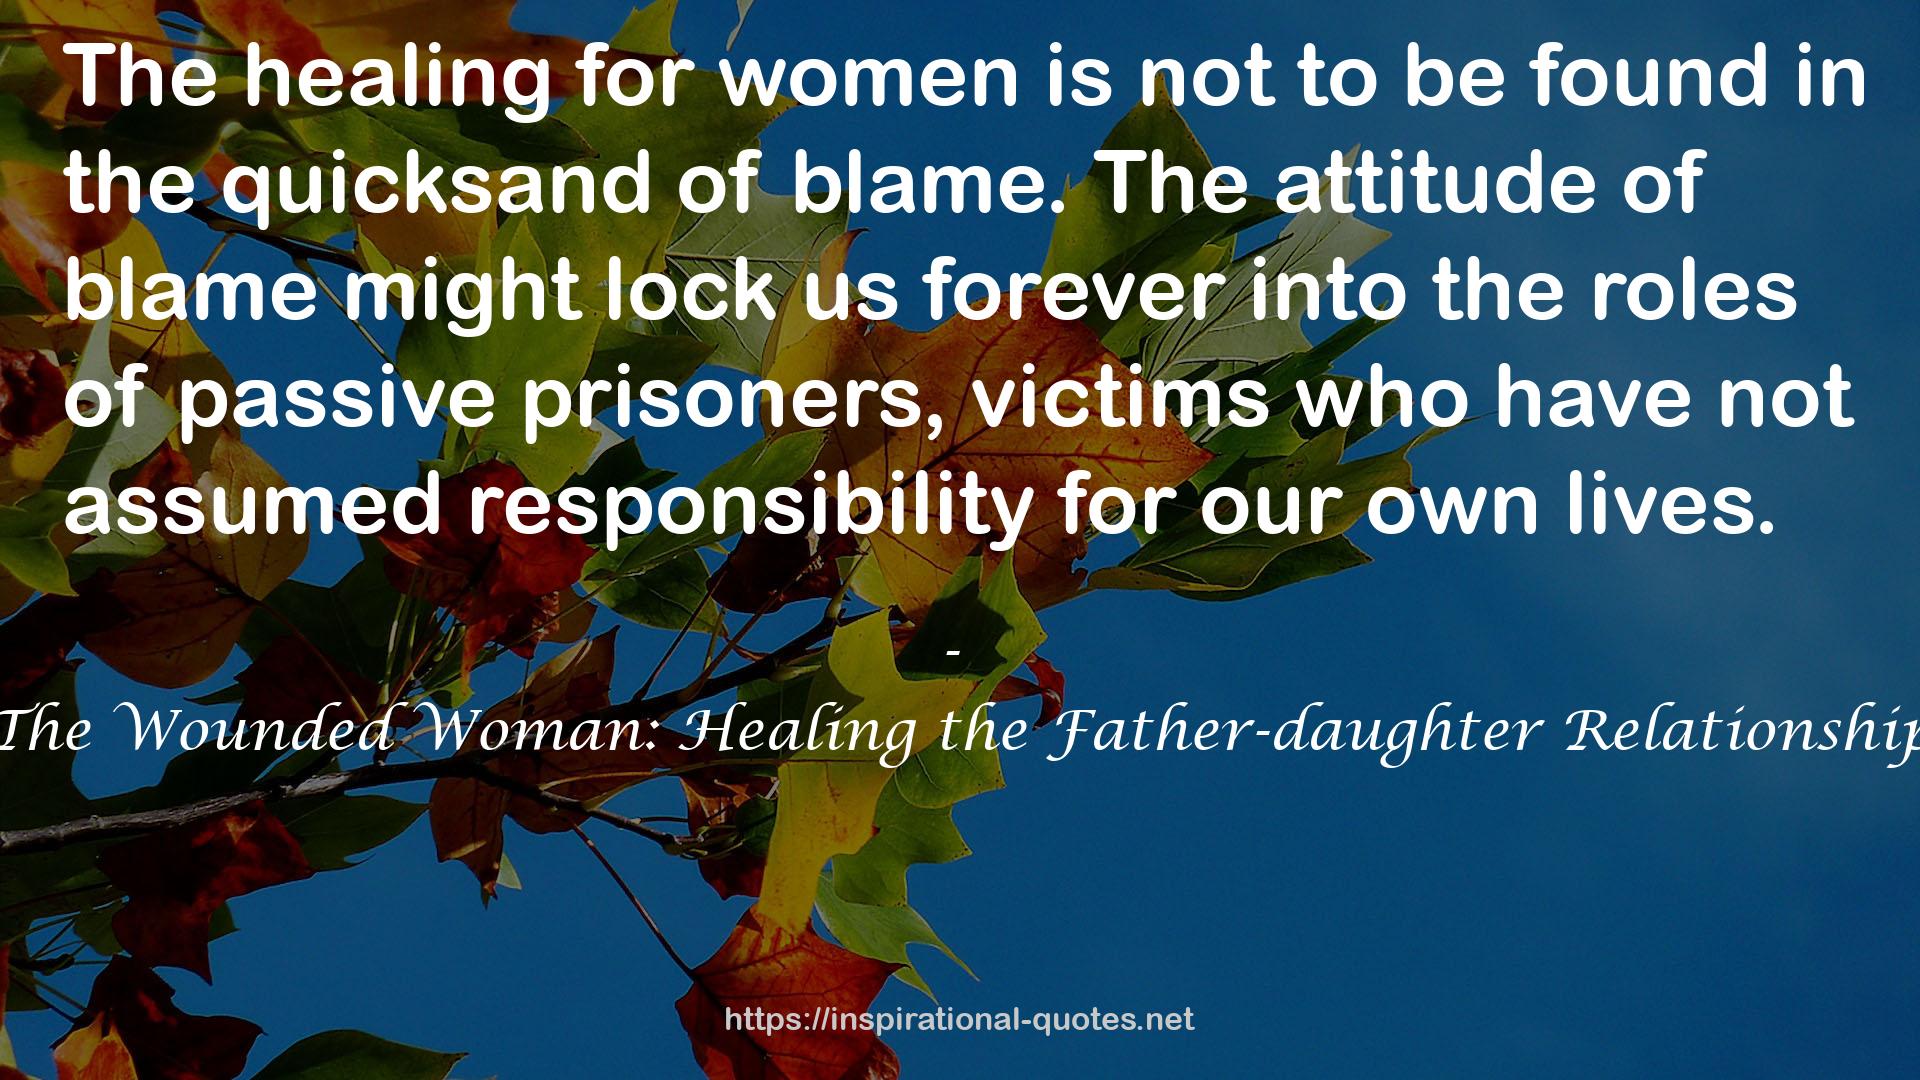 The Wounded Woman: Healing the Father-daughter Relationship QUOTES